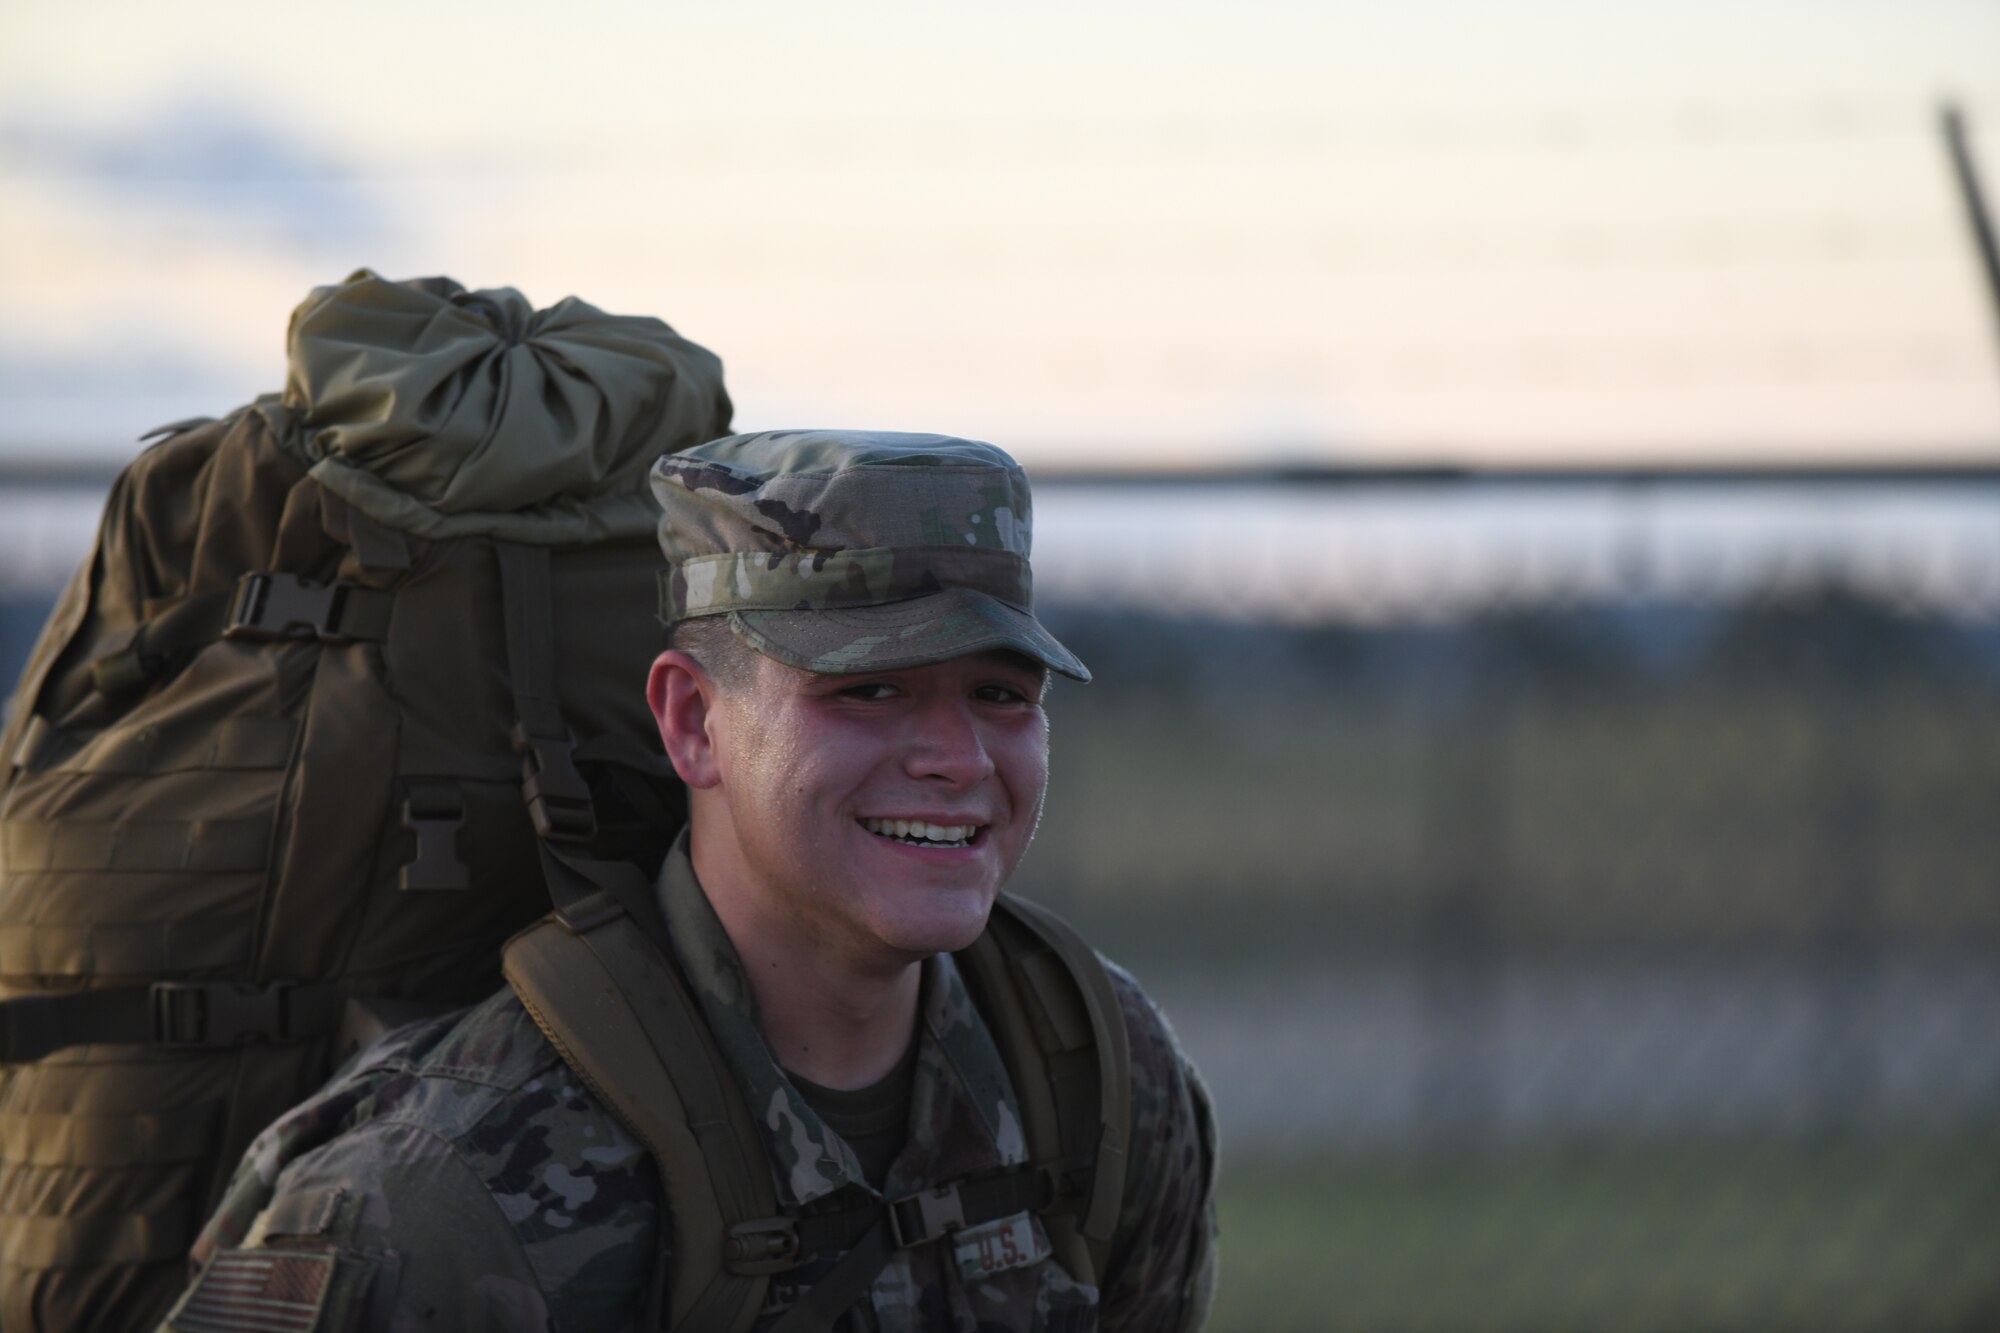 Airman 1st Class John Ennis, a 28th Bomb Wing Public Affairs broadcast journalist, carries a 33 pound rucksack as part of the German Armed Forces Proficiency test at Ellsworth Air Force Base, S.D., Sept. 21, 2019. Airmen tested alongside Army ROTC cadets and South Dakota Army National Guardsmen. Participants were required to complete six events in order to qualify for the coveted German Armed Forces Proficiency Badge. (U.S. Air Force Airman 1st Class Christina Bennett)